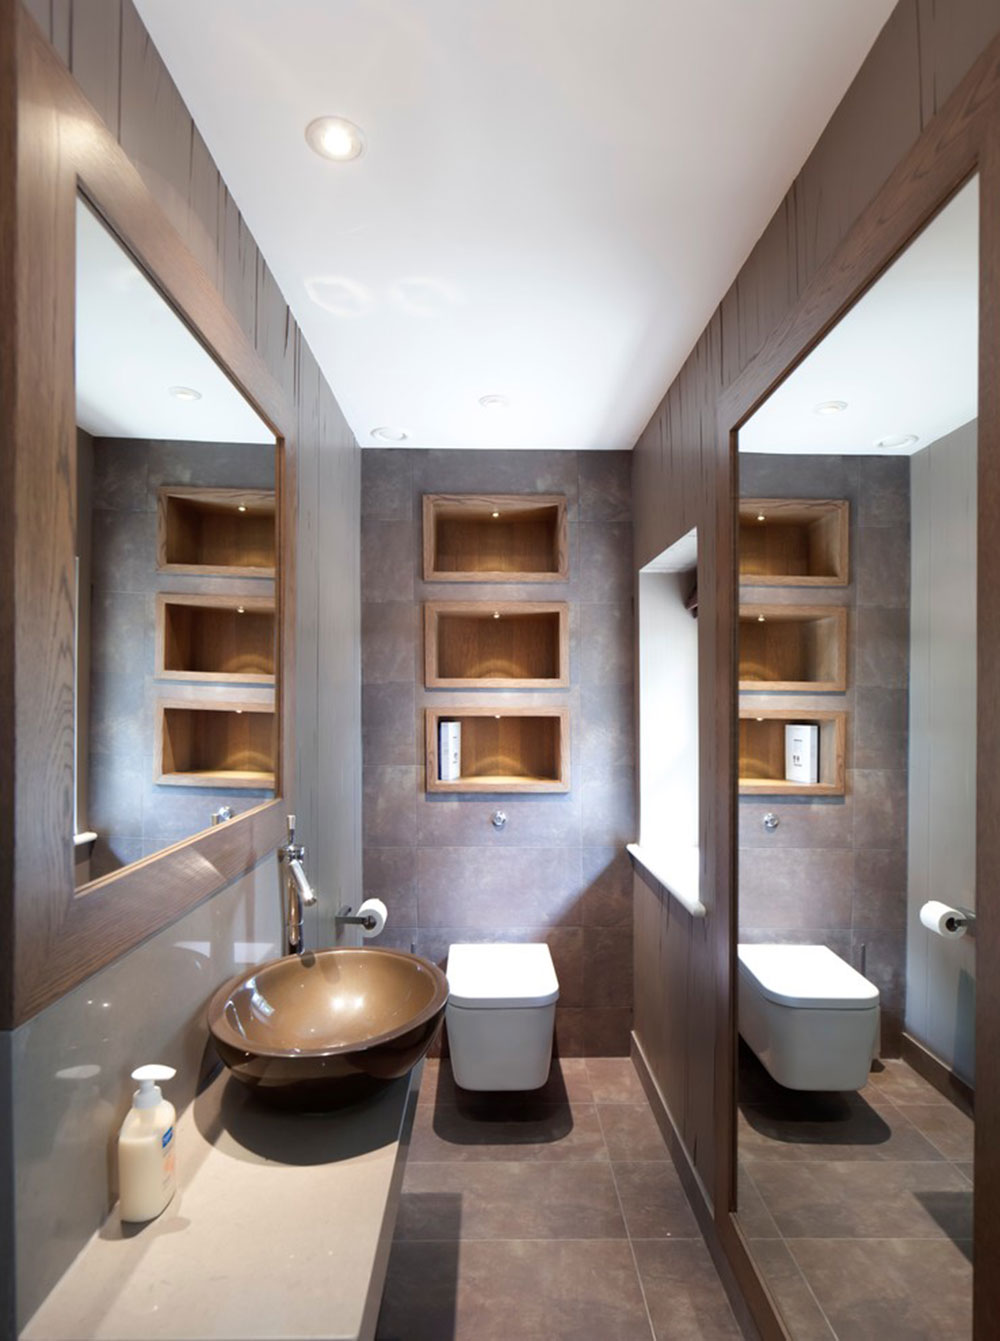 Manor-House-Refurbishment-by-Yiangou-Architects Small bathroom storage ideas you shouldn’t neglect